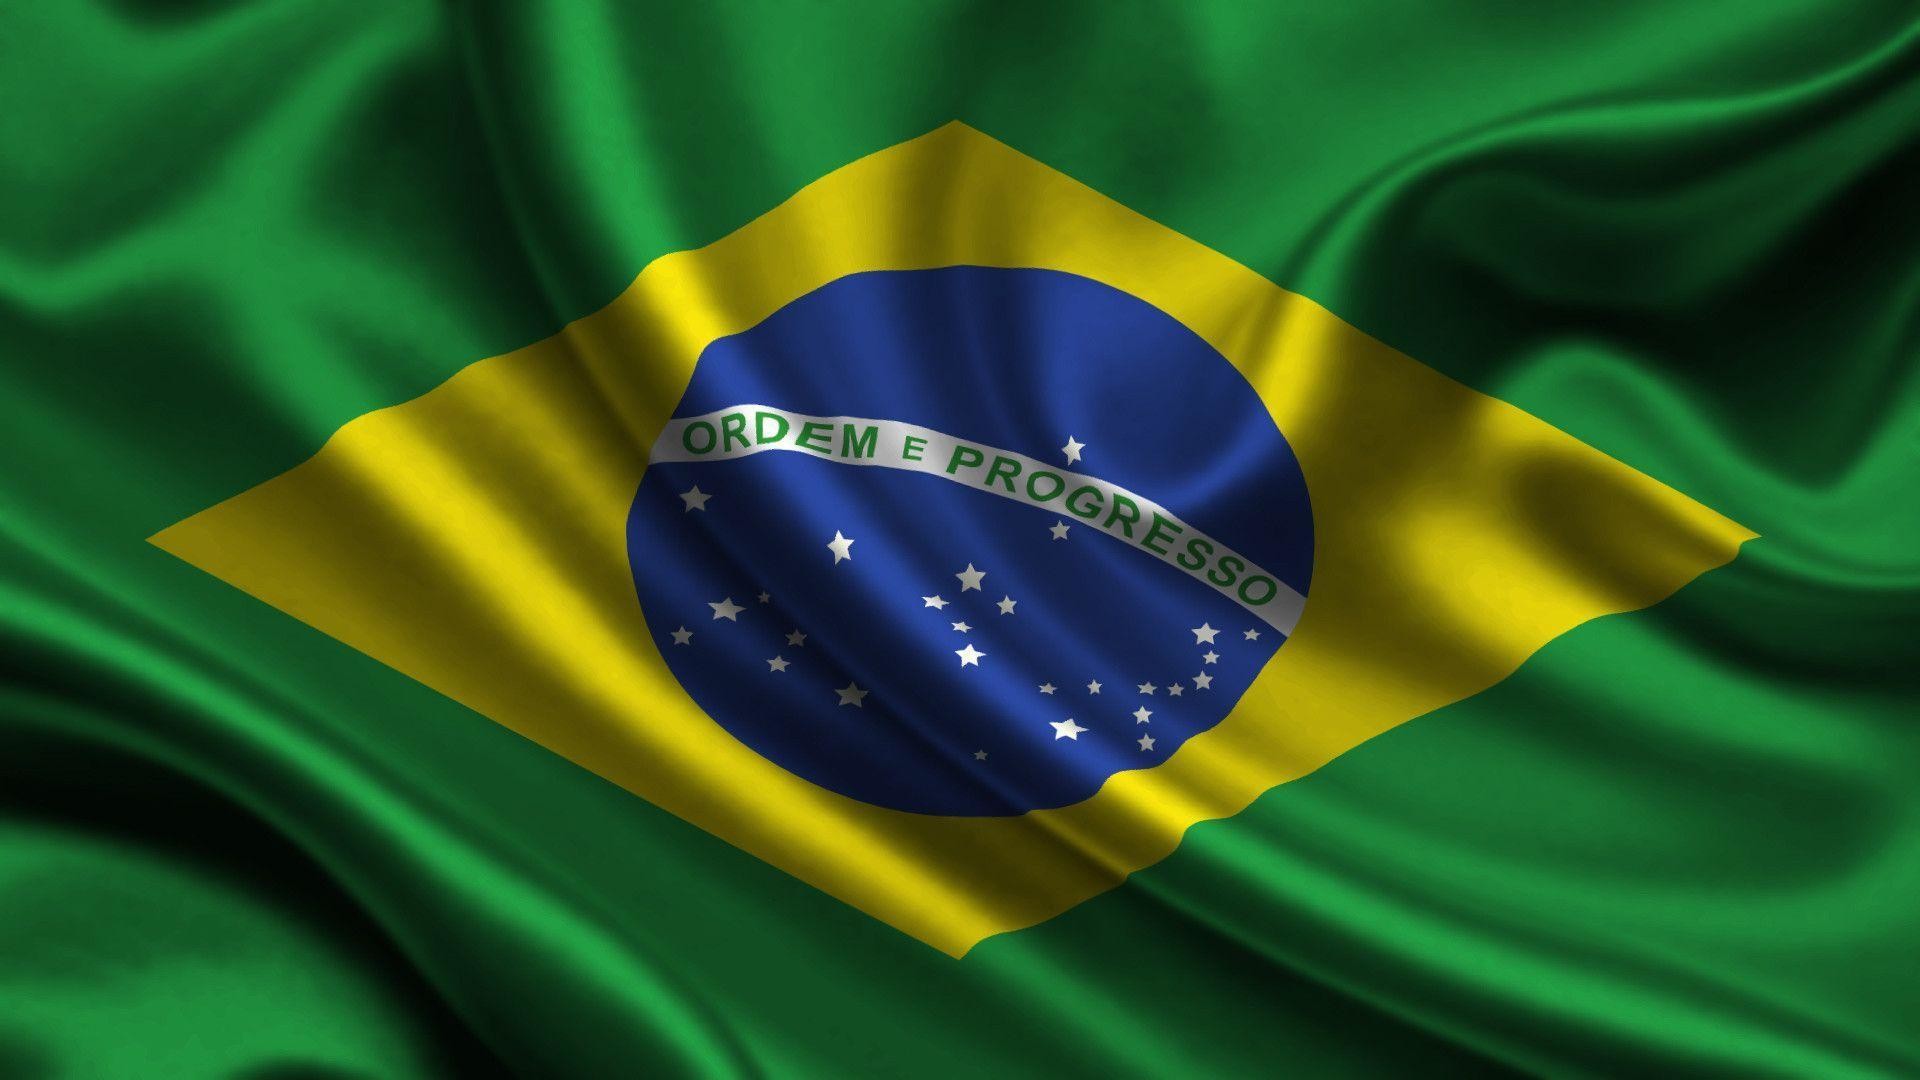 1920x1080 Portuguese speakers wanted (Update: found!) | Pipedrive blog